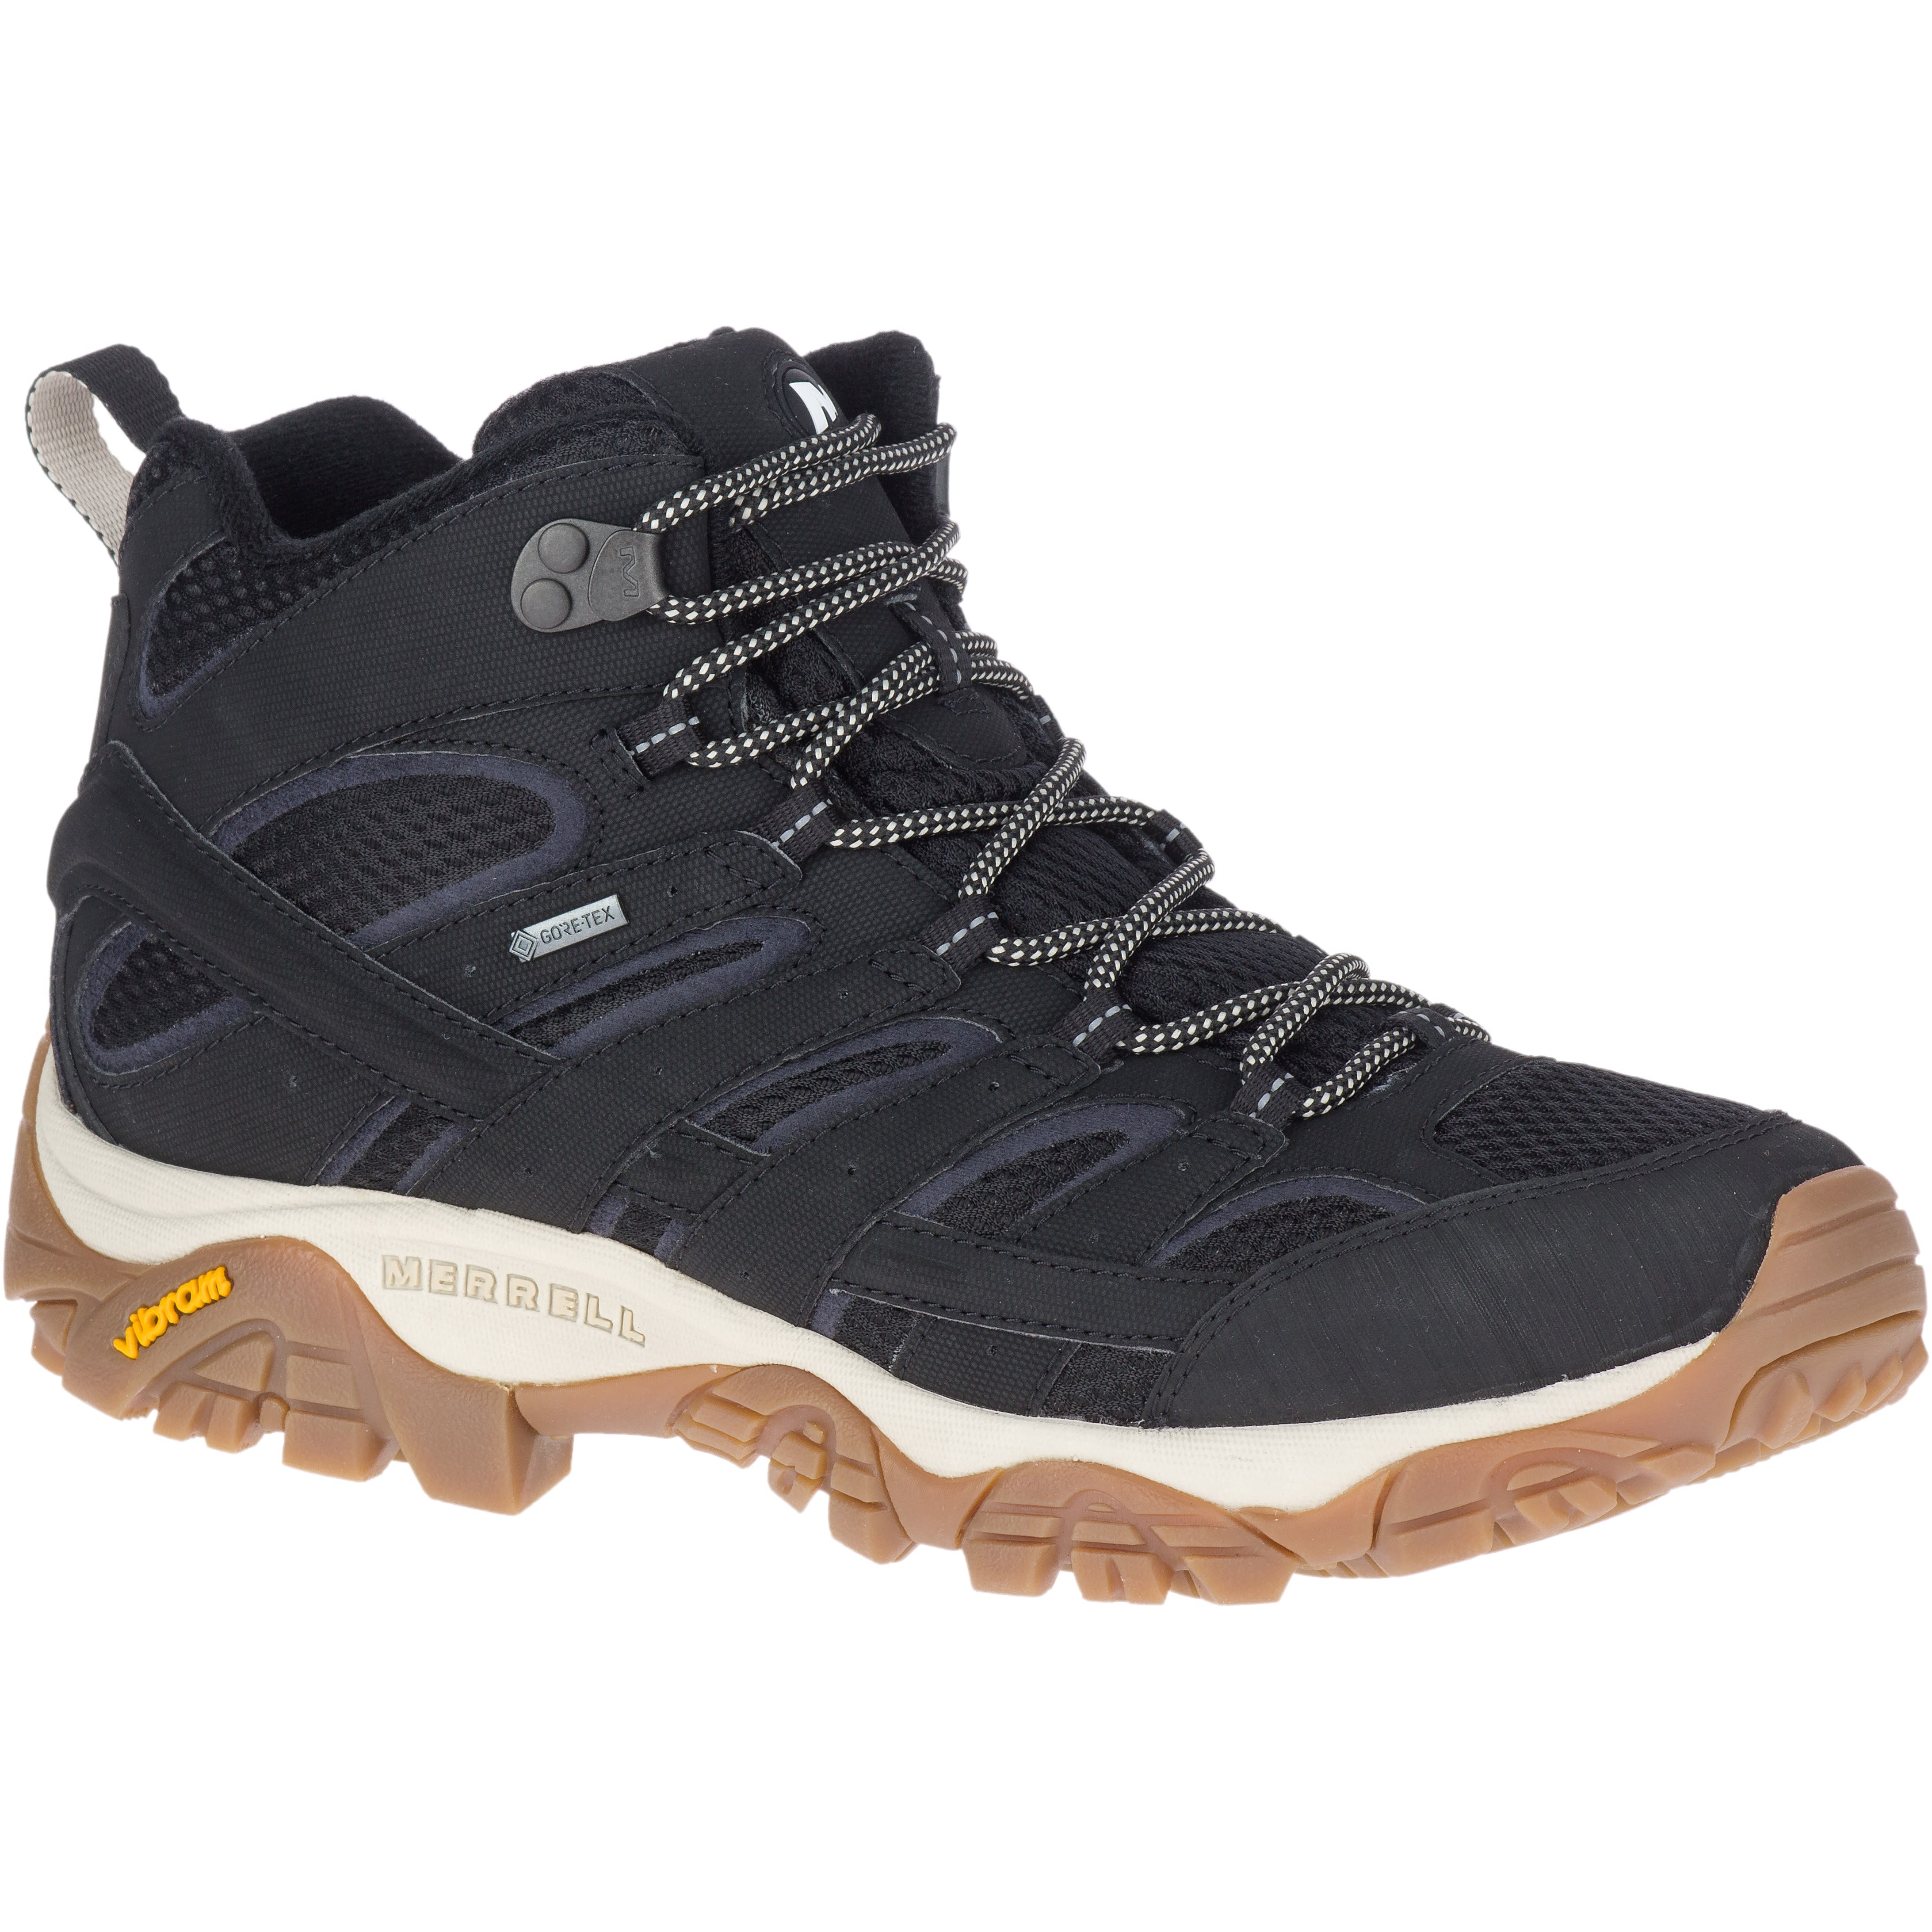 Buy Merrell Men's Moab 2 Mid Gore-Tex from Outnorth